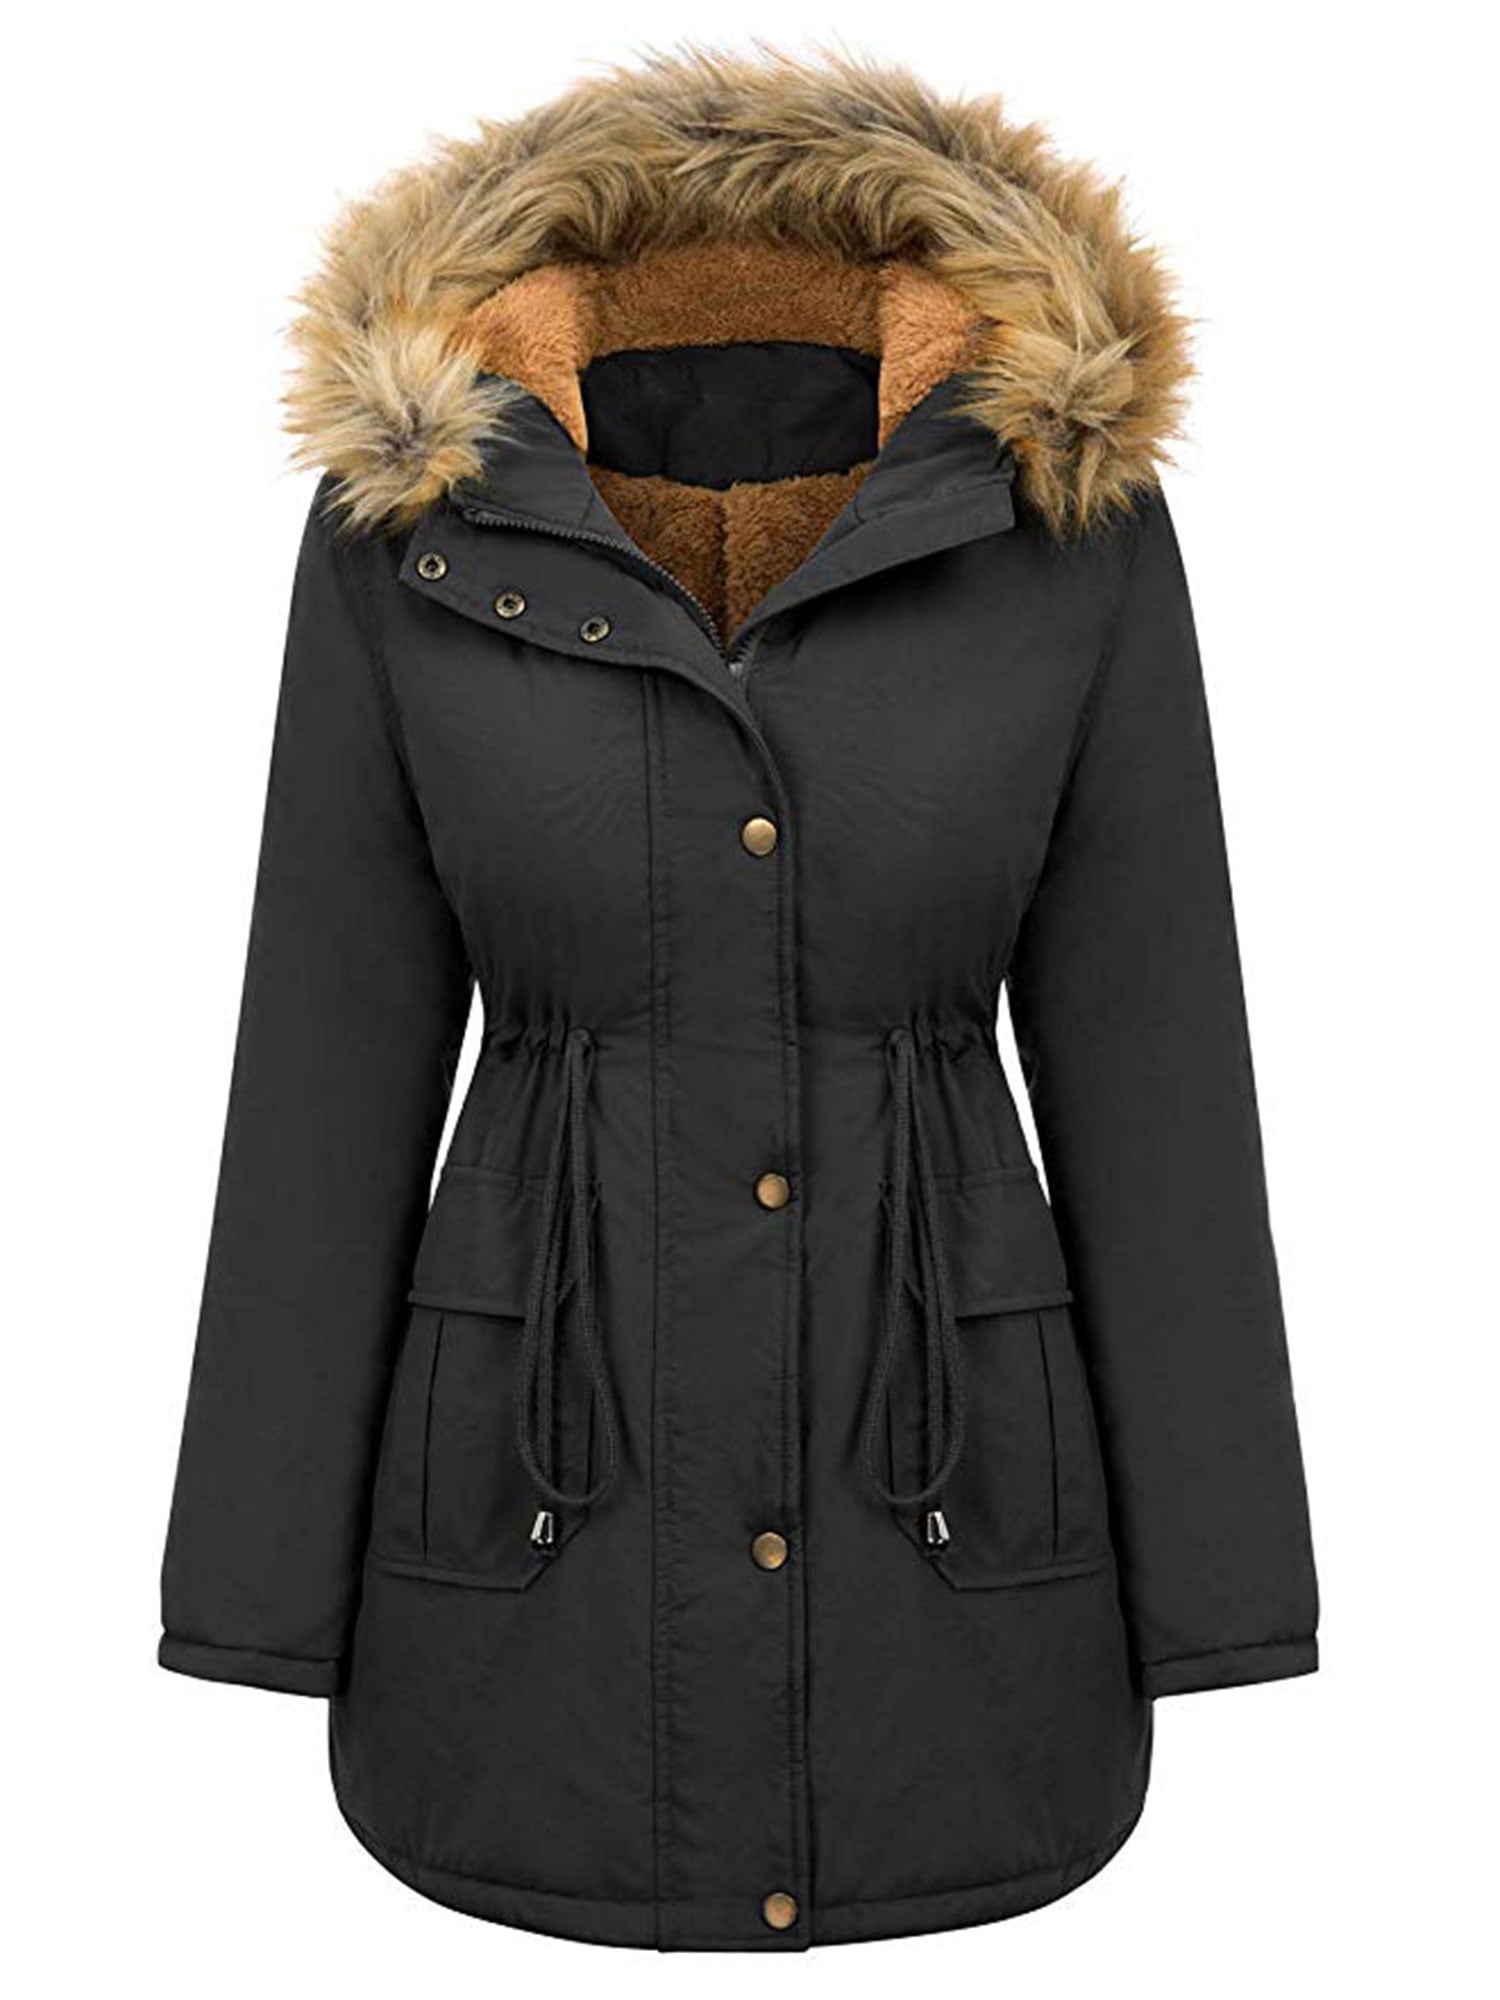 Hooded Thicken Parka Trench Coat for Women Winter Faux Fur Fleece Lined ...